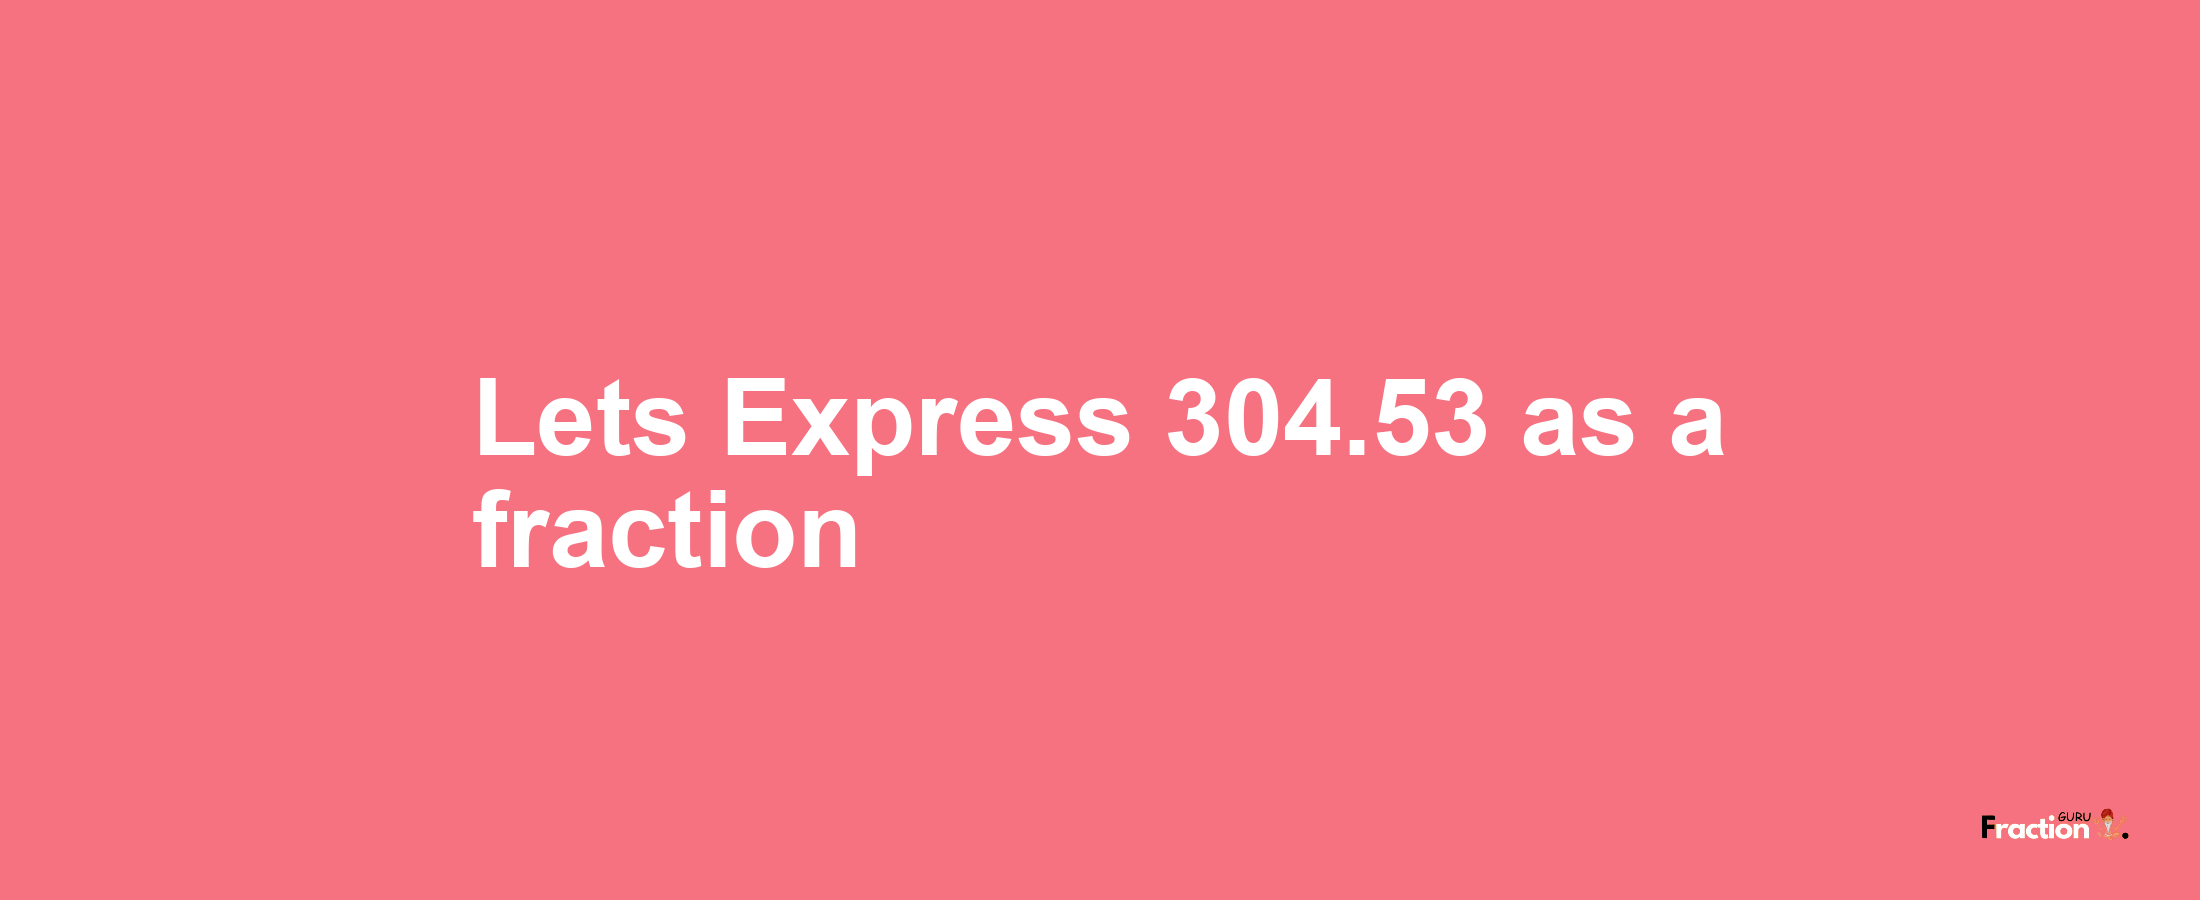 Lets Express 304.53 as afraction